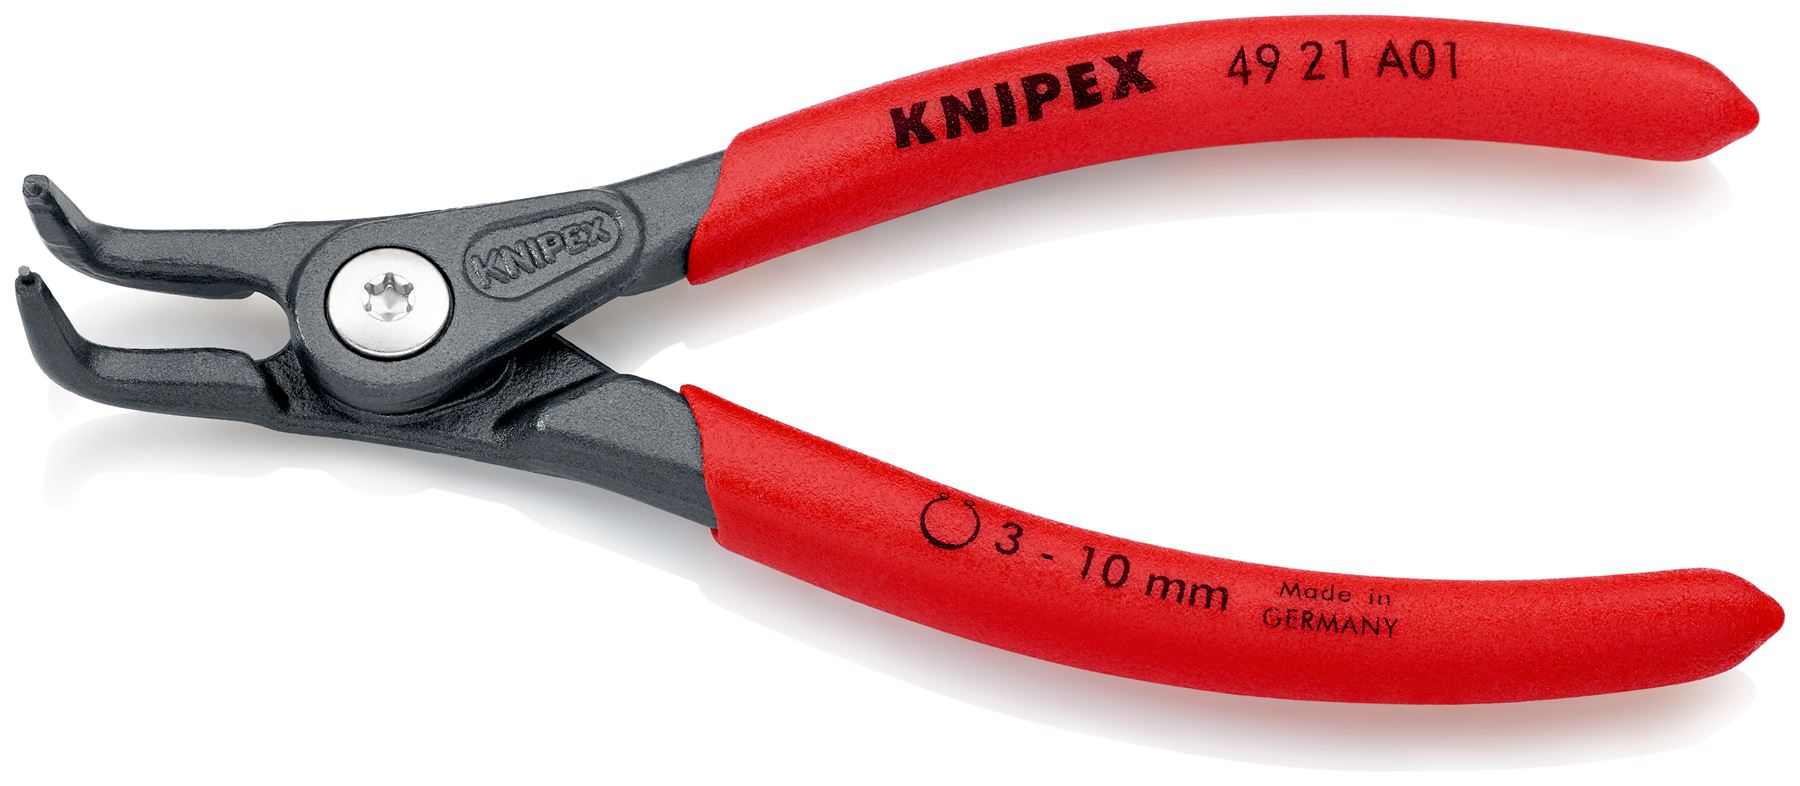 KNIPEX Precision Circlip Pliers for External Circlips on Shafts 90° Angled 130mm 0.9mm Diameter Tips 49 21 A01